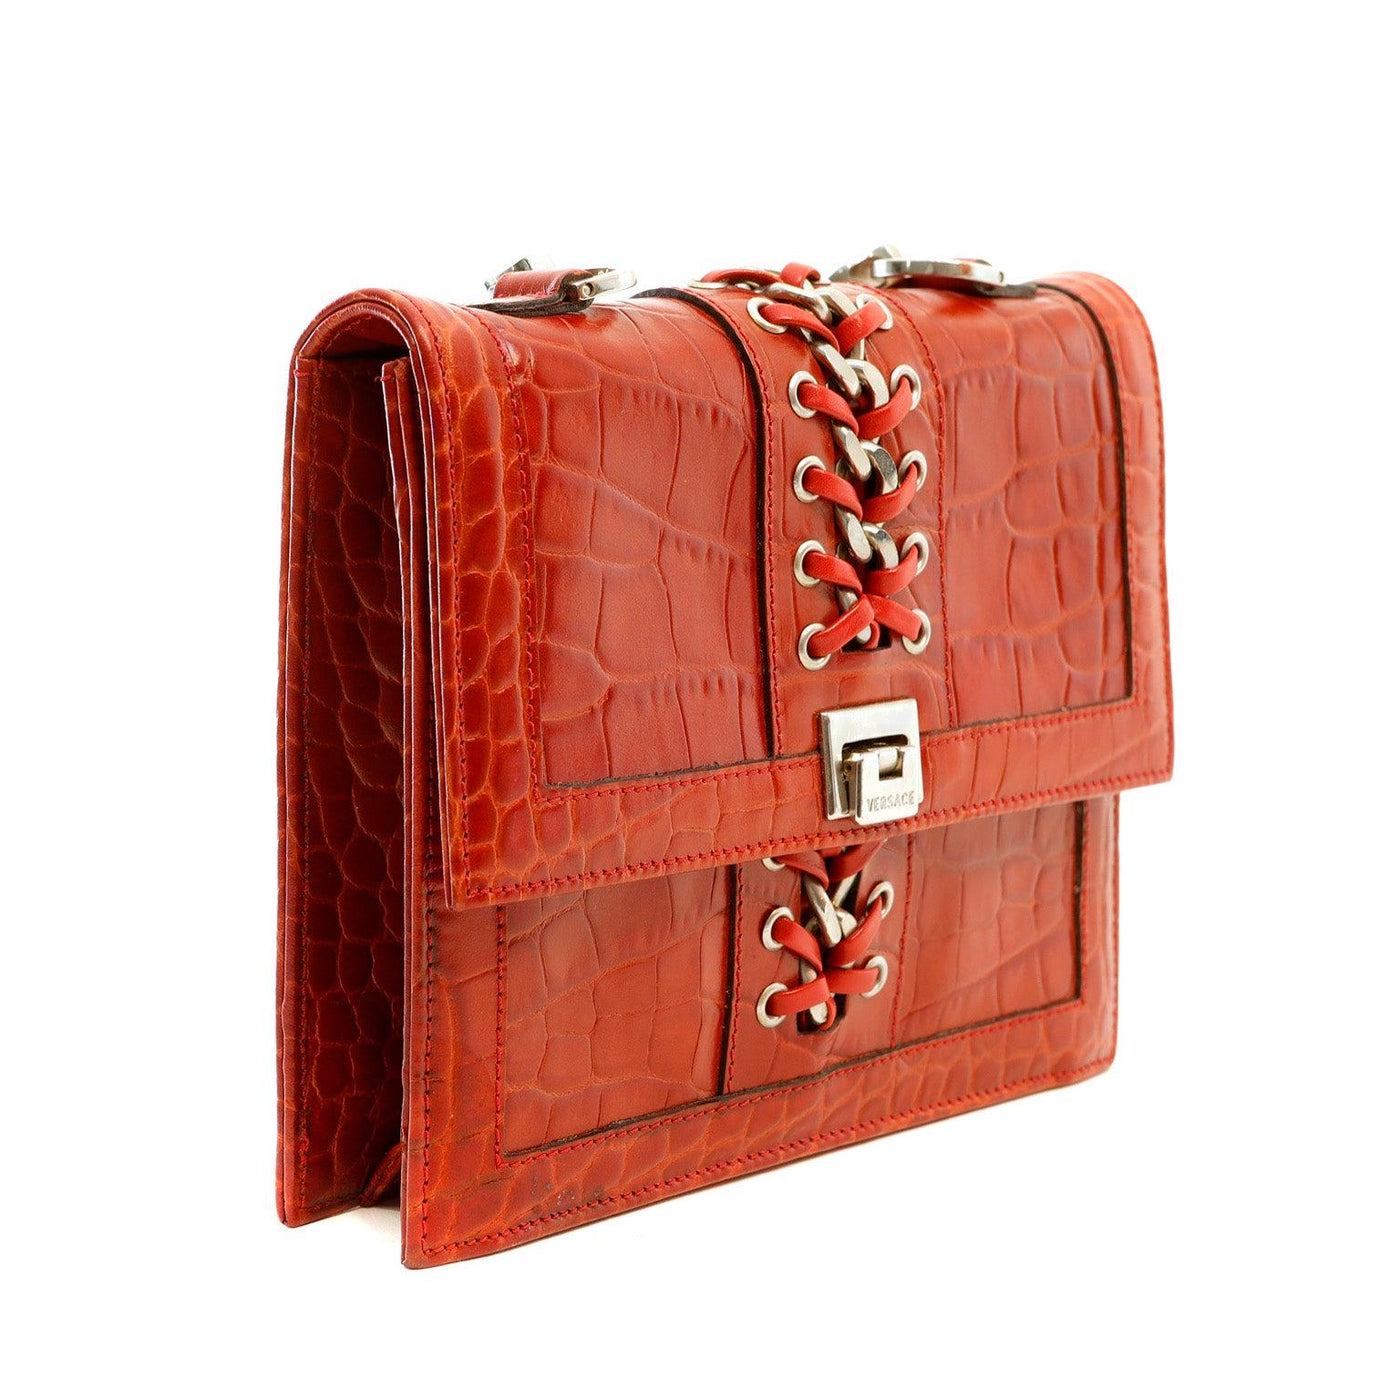 Versace Red Embossed Croc Evening Bag - Only Authentics